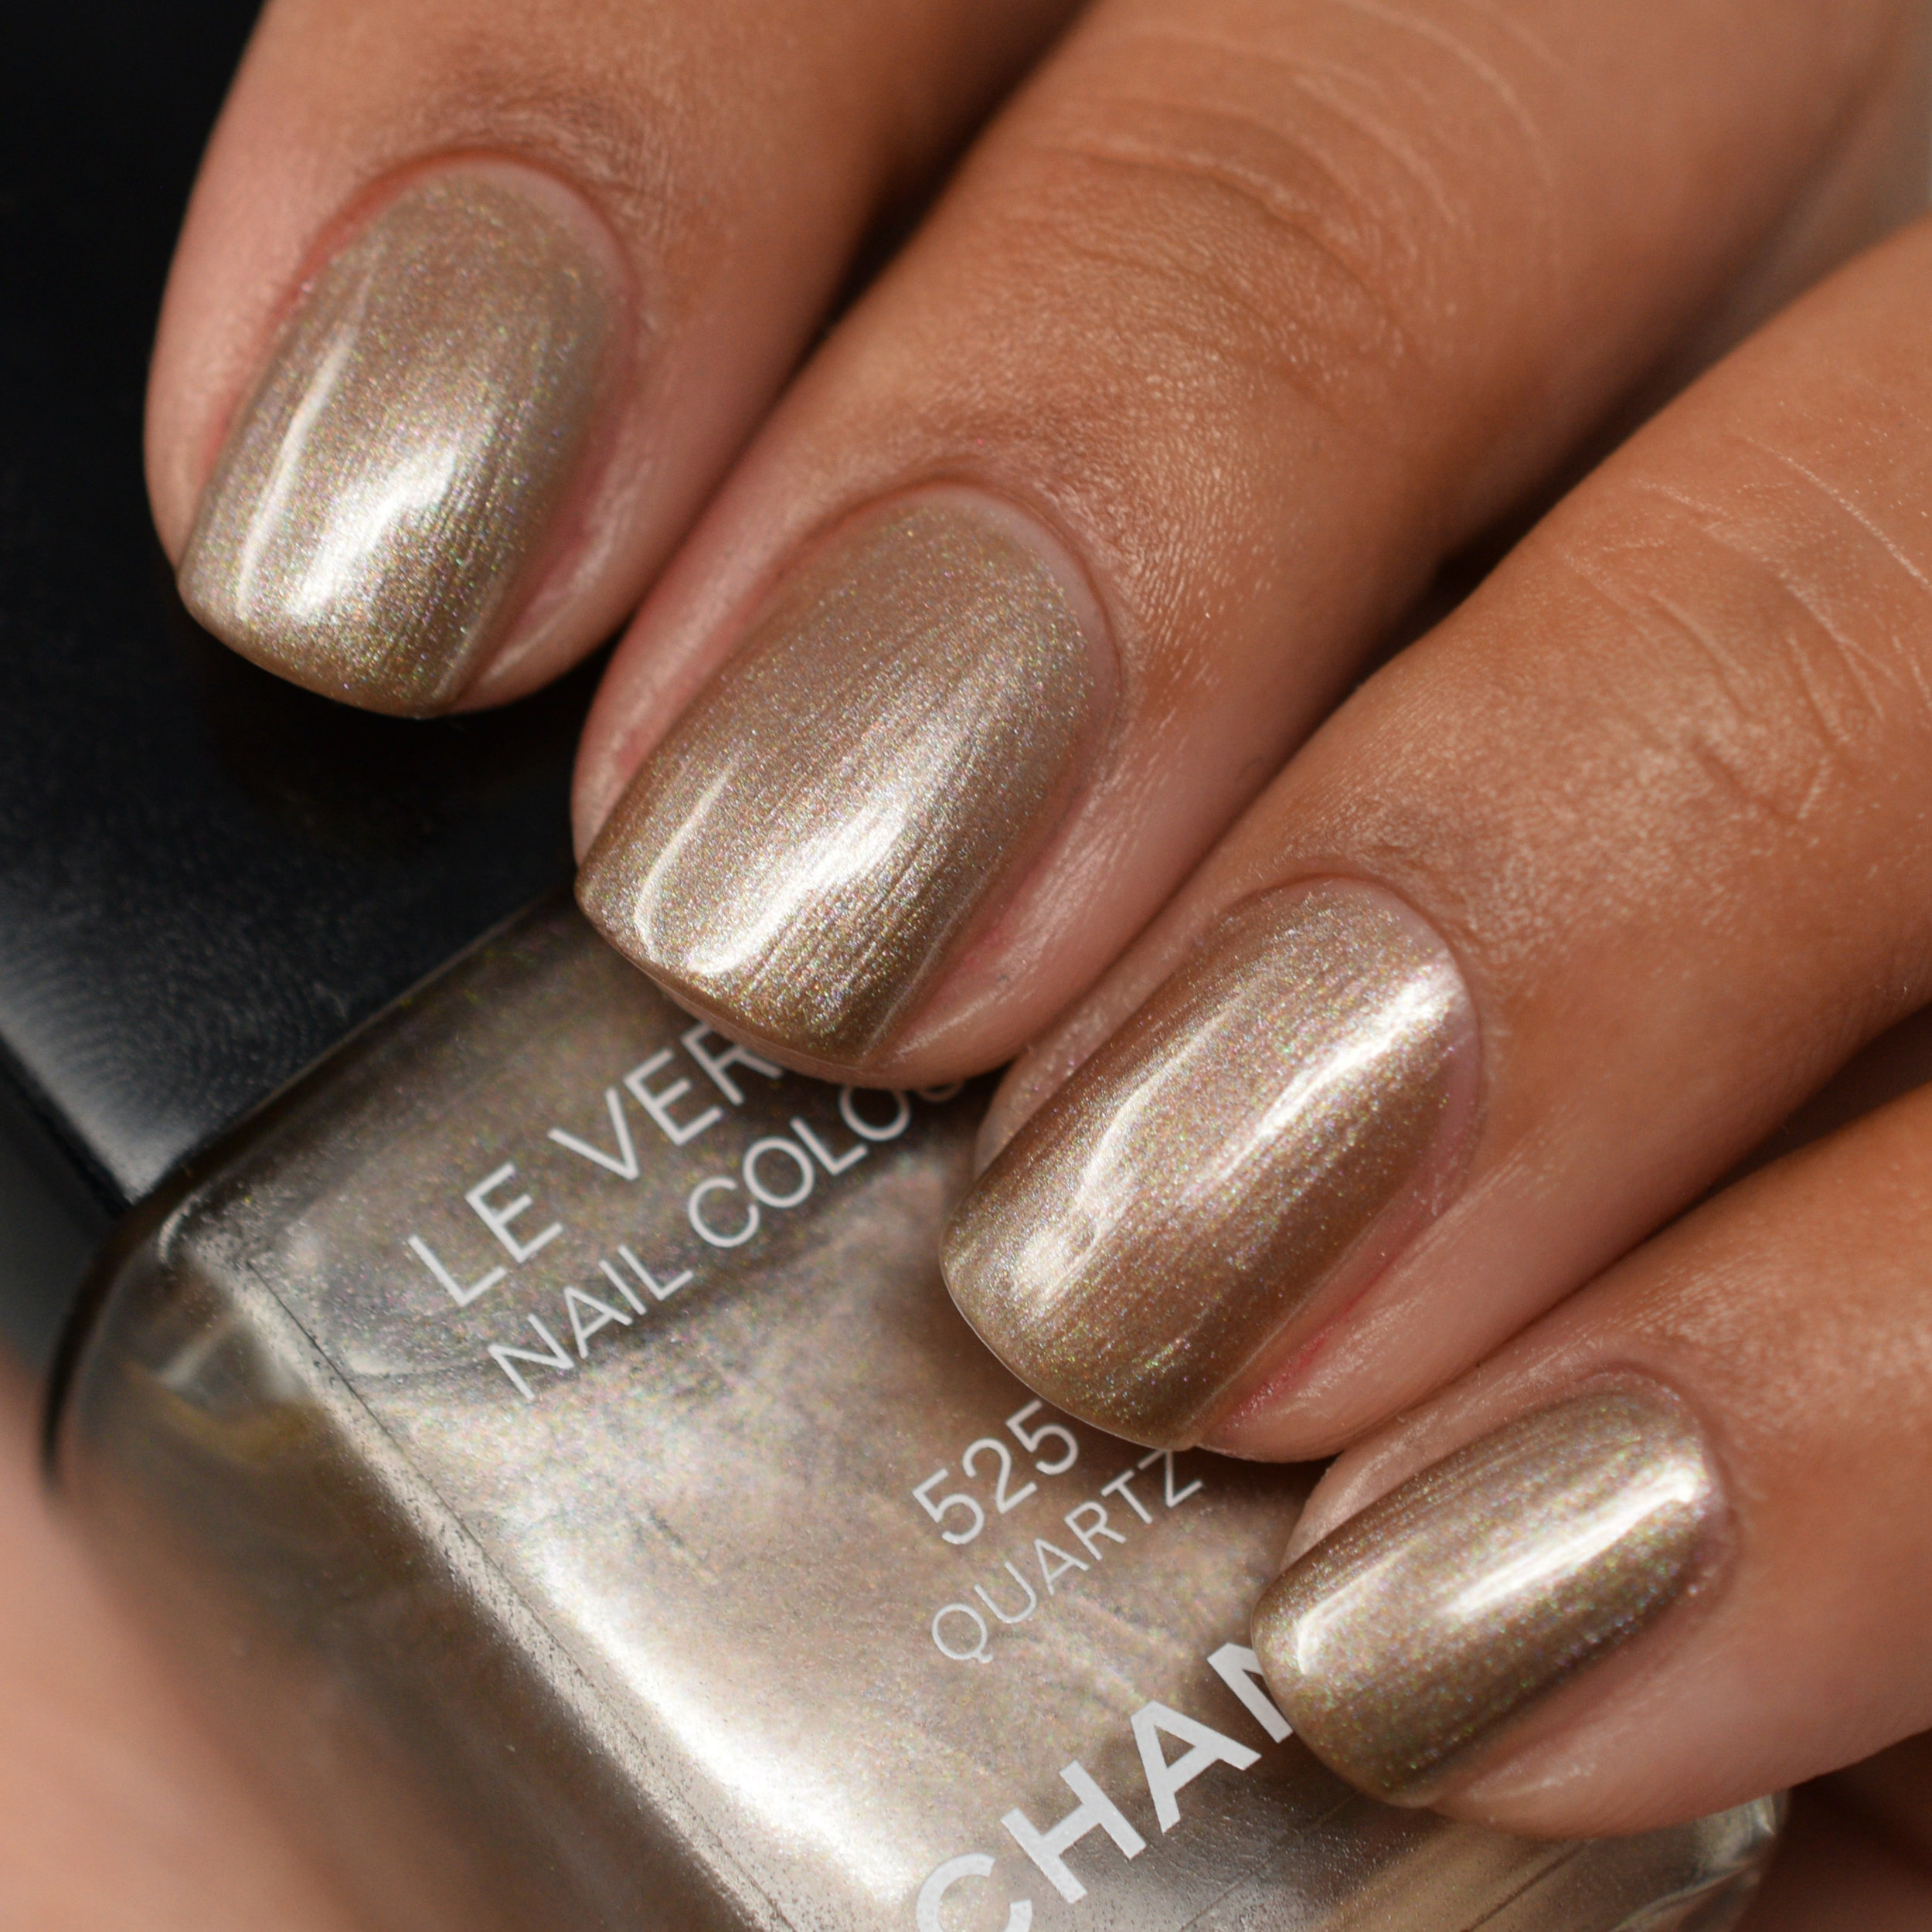 Chanel Illusions D'Ombres (fall 2011) — Throwback Lacquer